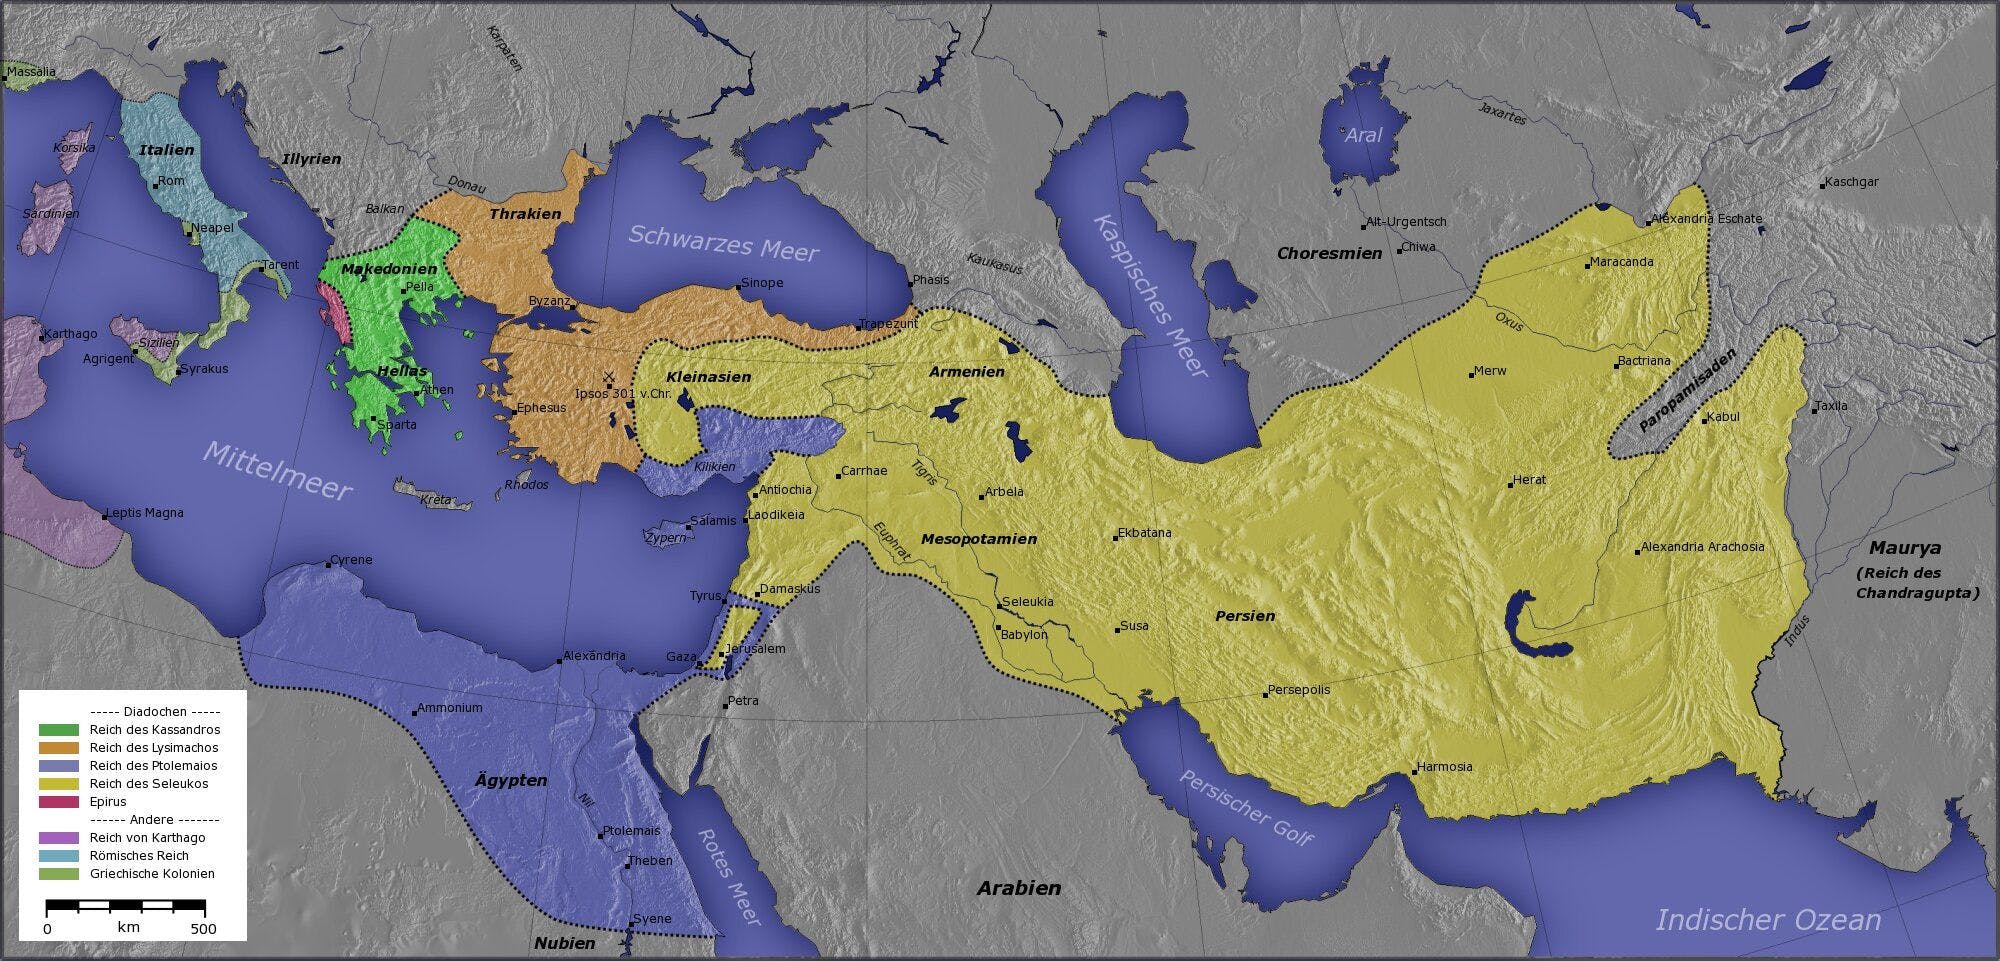 The Macedonian Empire, 336-323 BCE and Kingdoms of the Diadochi in 301 BCE and 200 BCE (by William R. Shepherd, CC BY-SA 3.0 Wikimedia Commons)